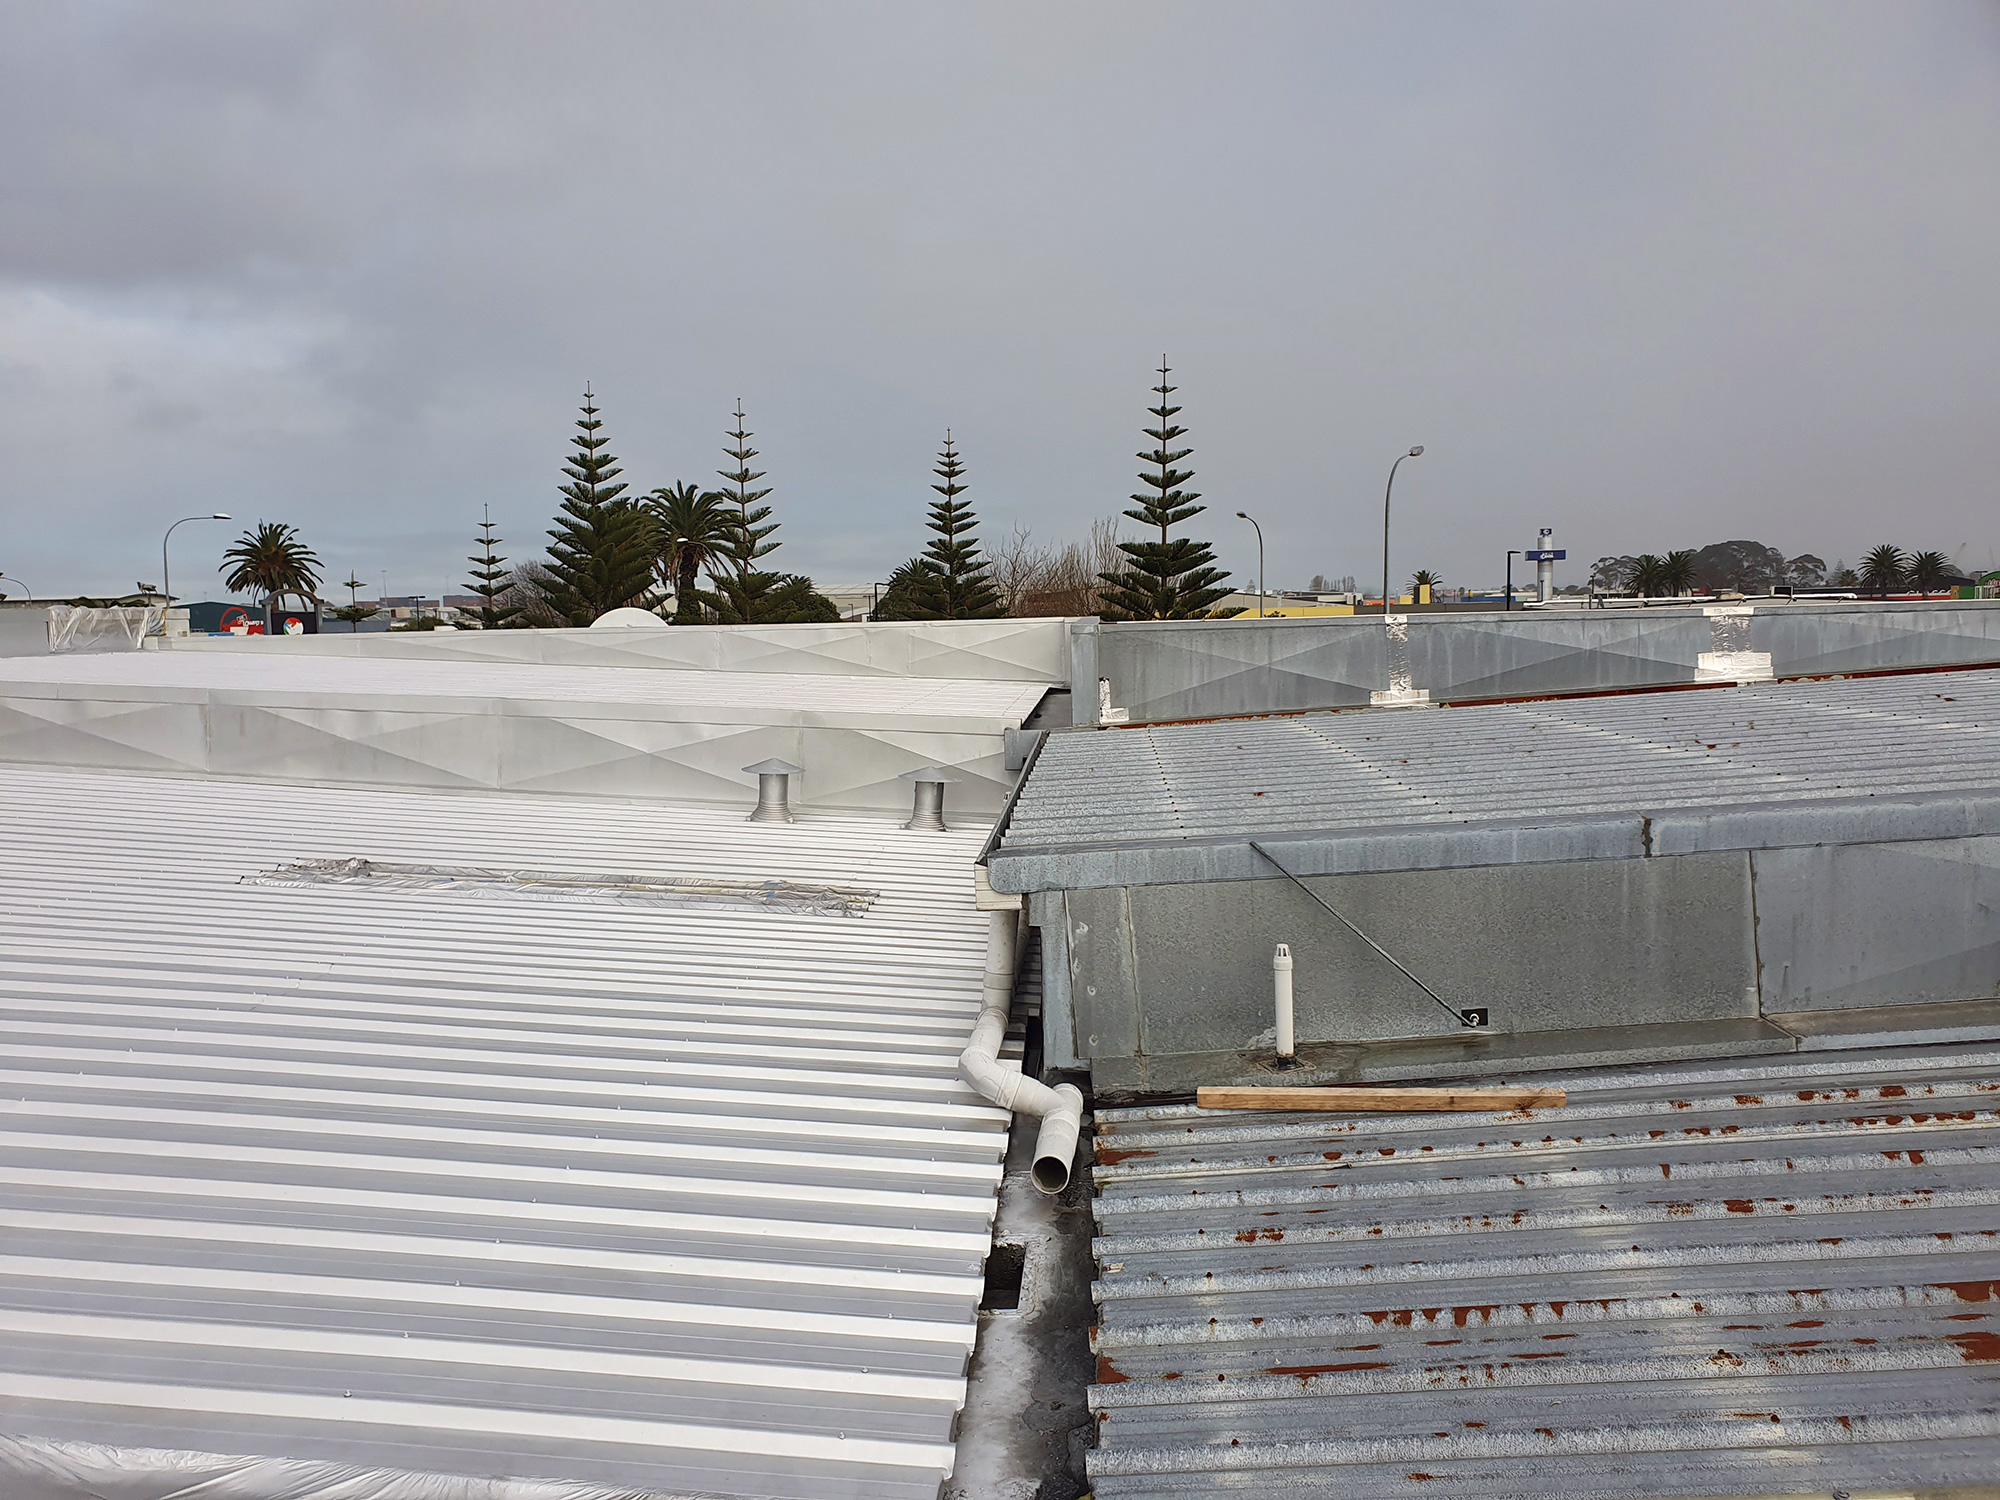 Rusty commercial roof repair - Re roof was not an option